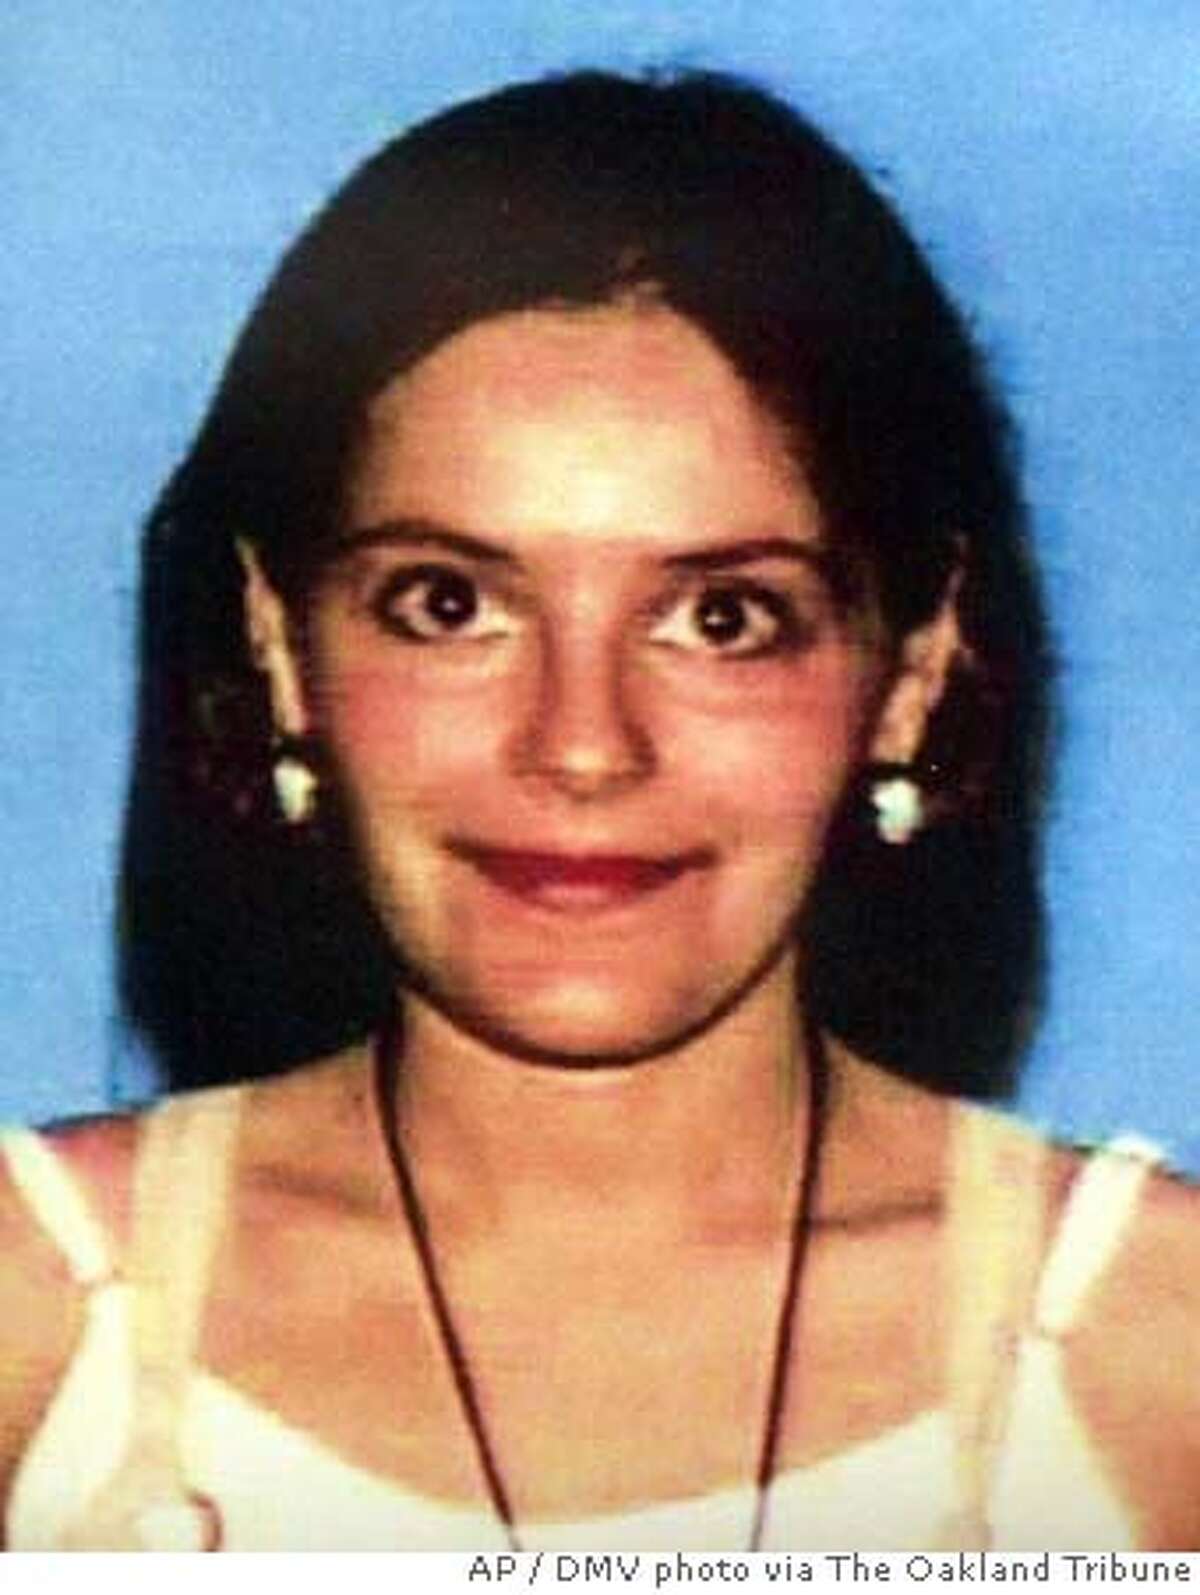 In this 1999 California DMV photo, Nina Reiser, who has been missing since Sept. 3, 2006, is shown On Tuesday, Oct. 10, 2006, Oakland, Calif., Deputy Chief Howard Jordan said they have charged her husband, Hans Reiser, on suspicion of murder. (AP Photo/DMV photo via The Oakland Tribune, )